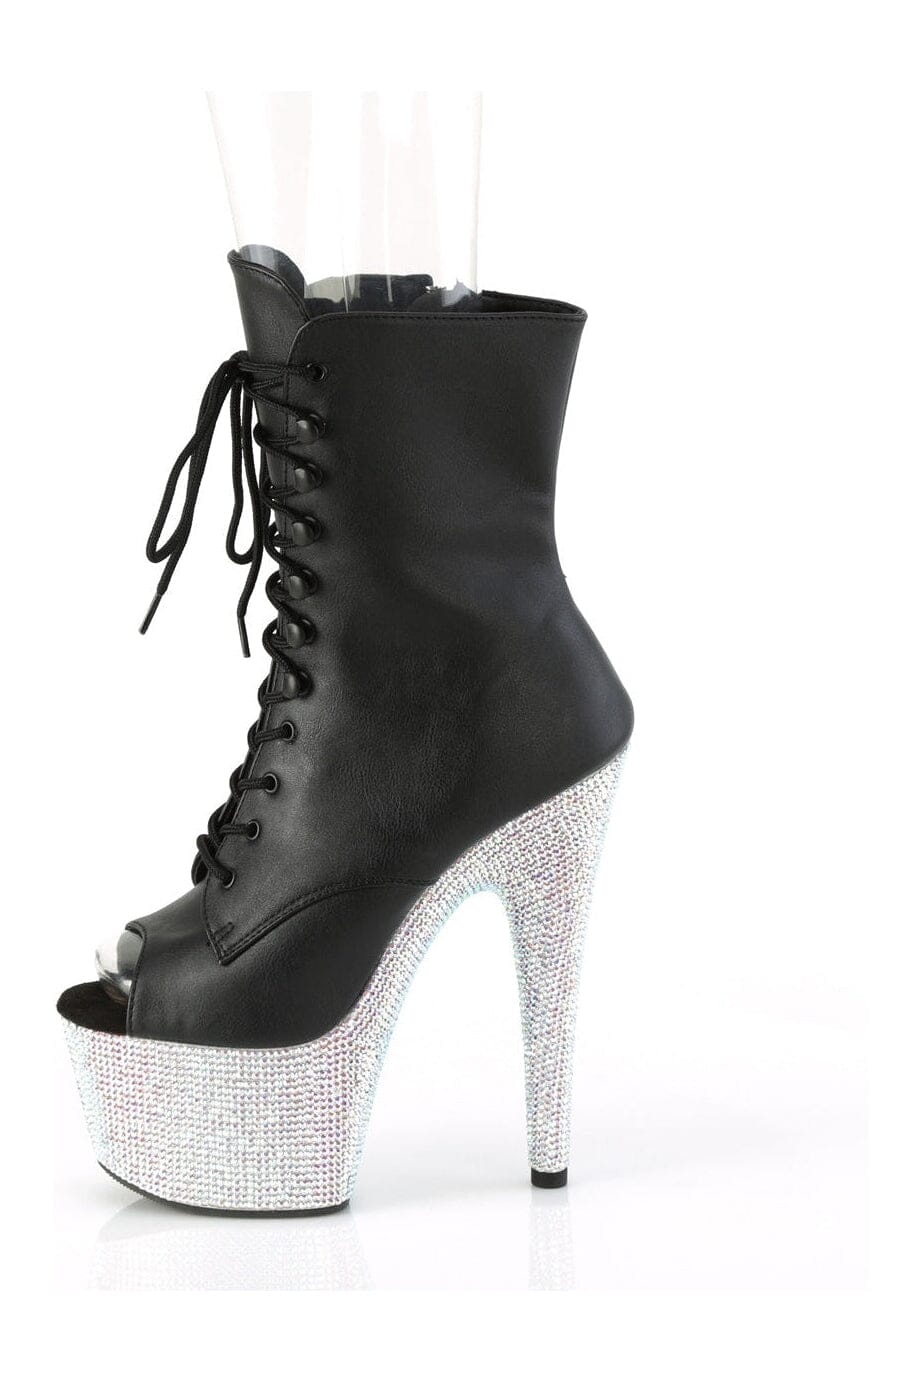 BEJEWELED-1021-7 Black Faux Leather Ankle Boot-Ankle Boots-Pleaser-SEXYSHOES.COM